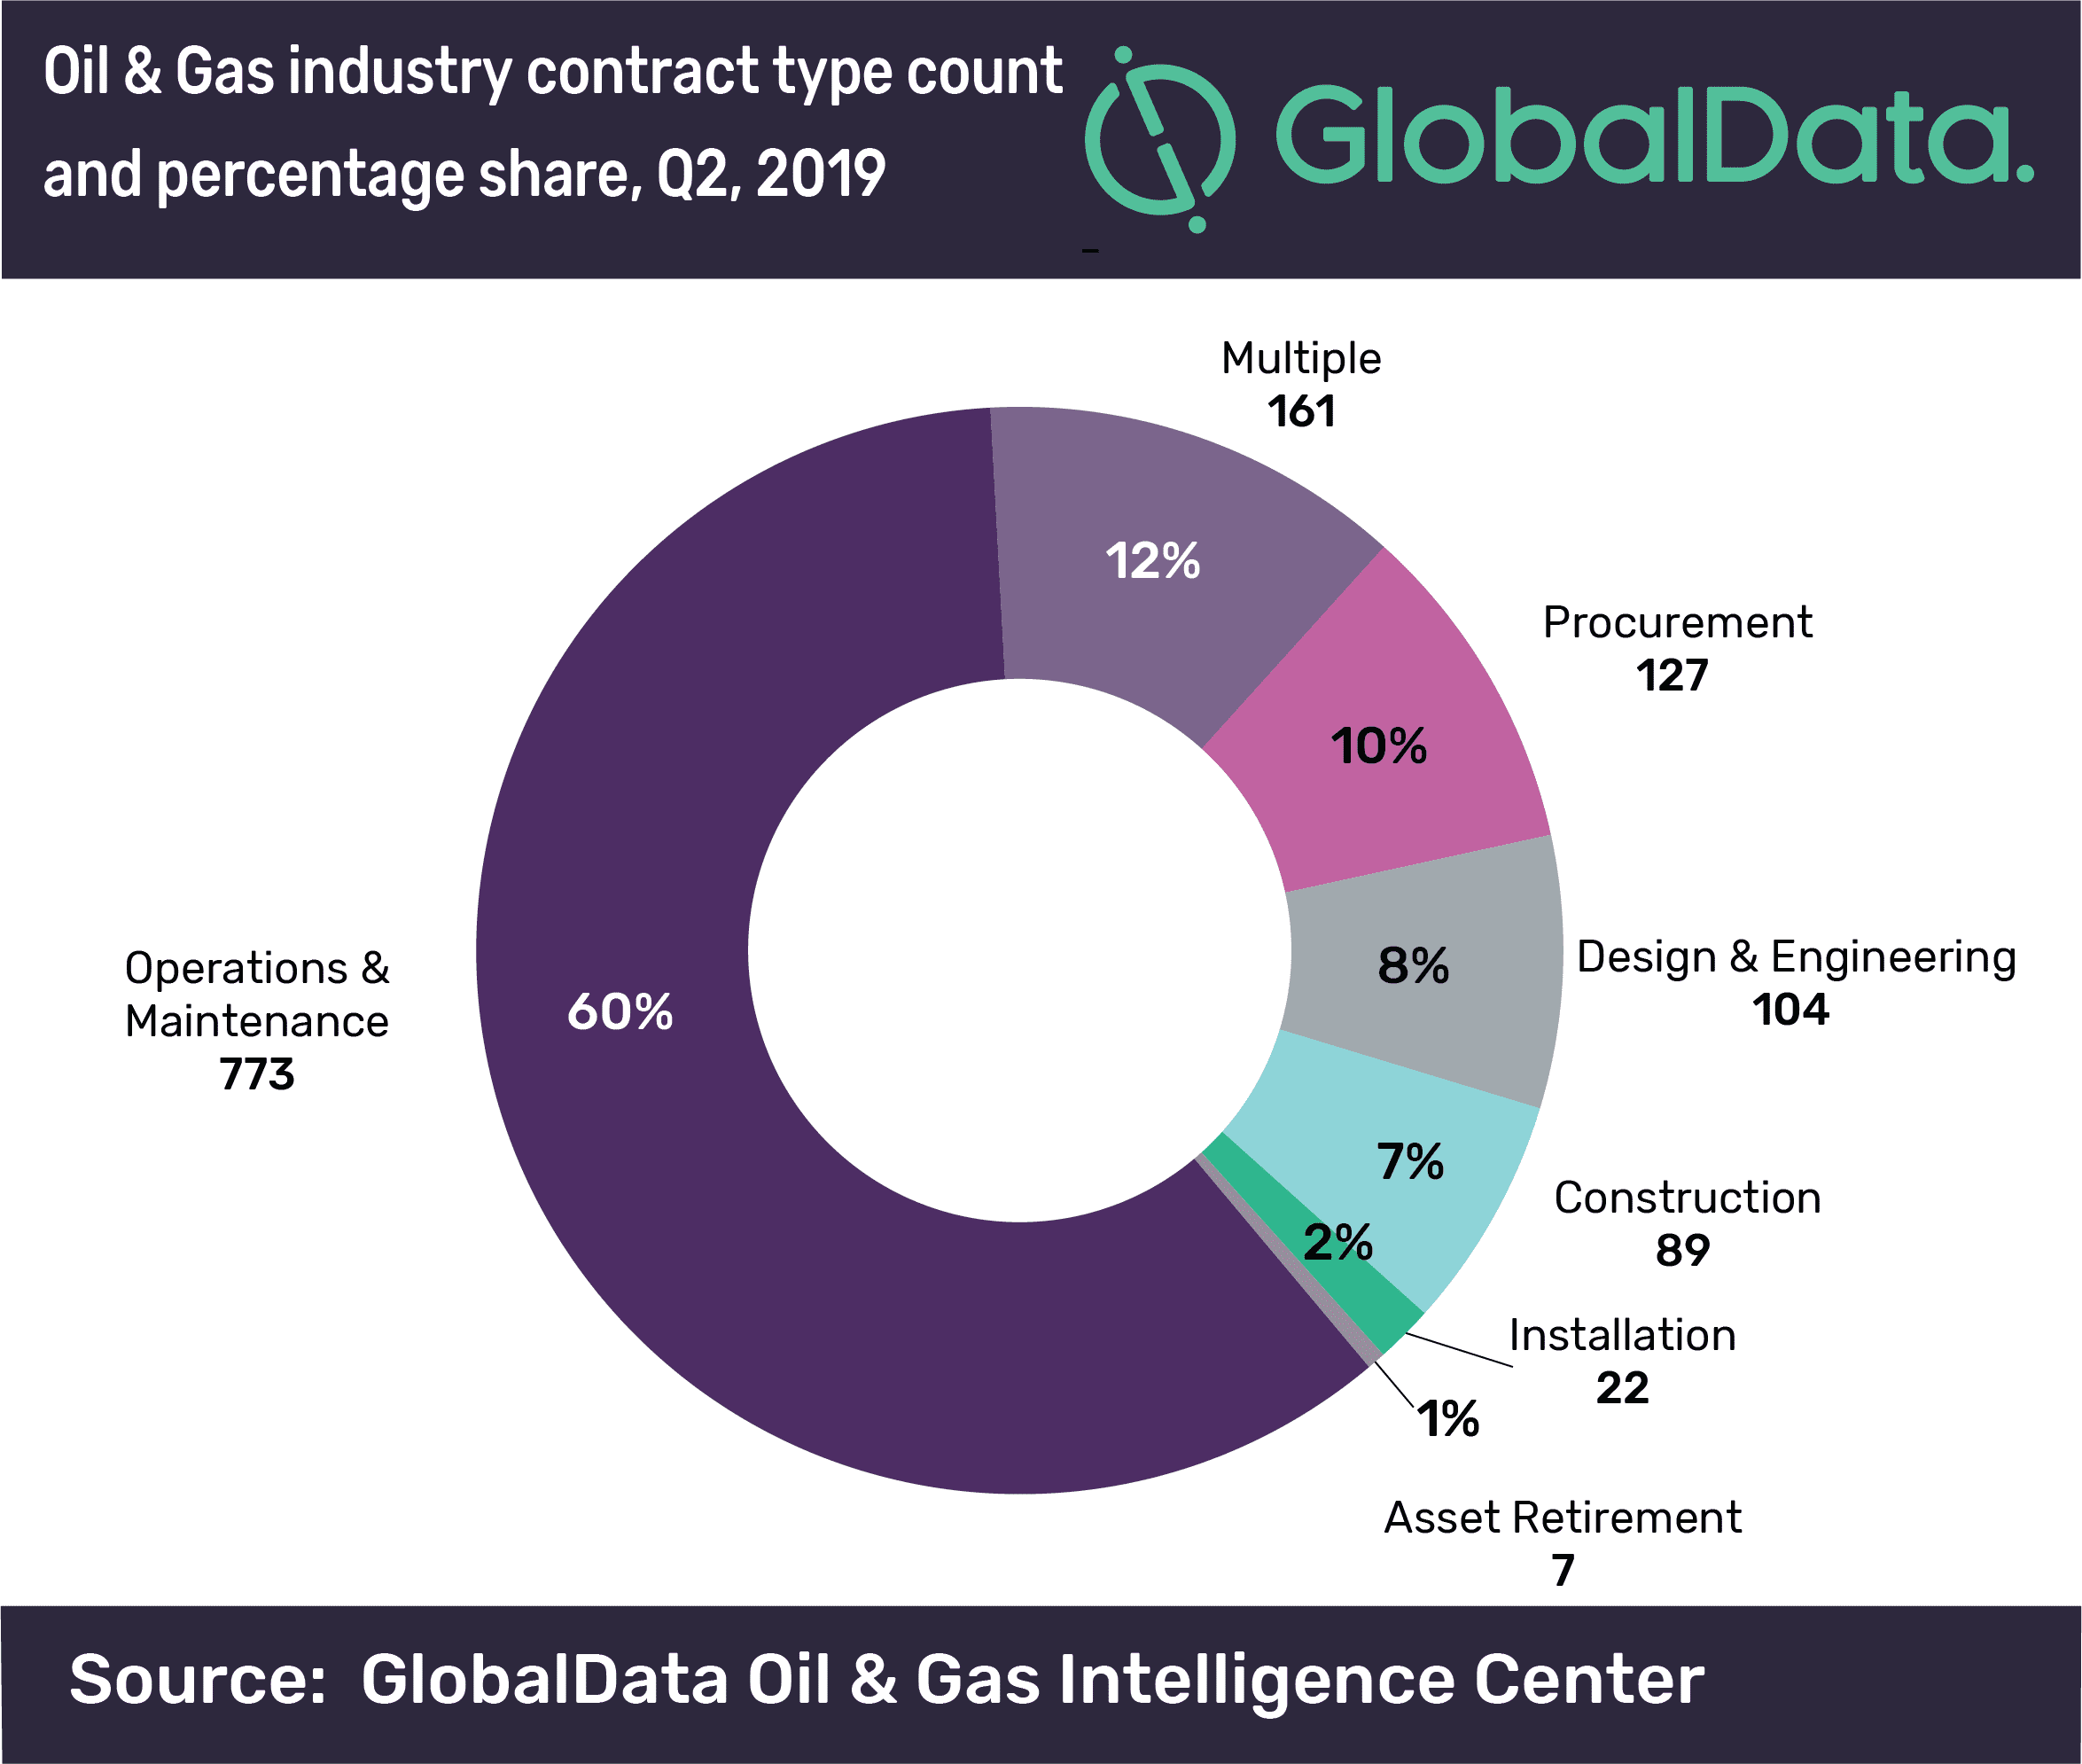 Bechtel and CCS JV led surge in global oil & gas contracts value to US$42bn in Q2 2019